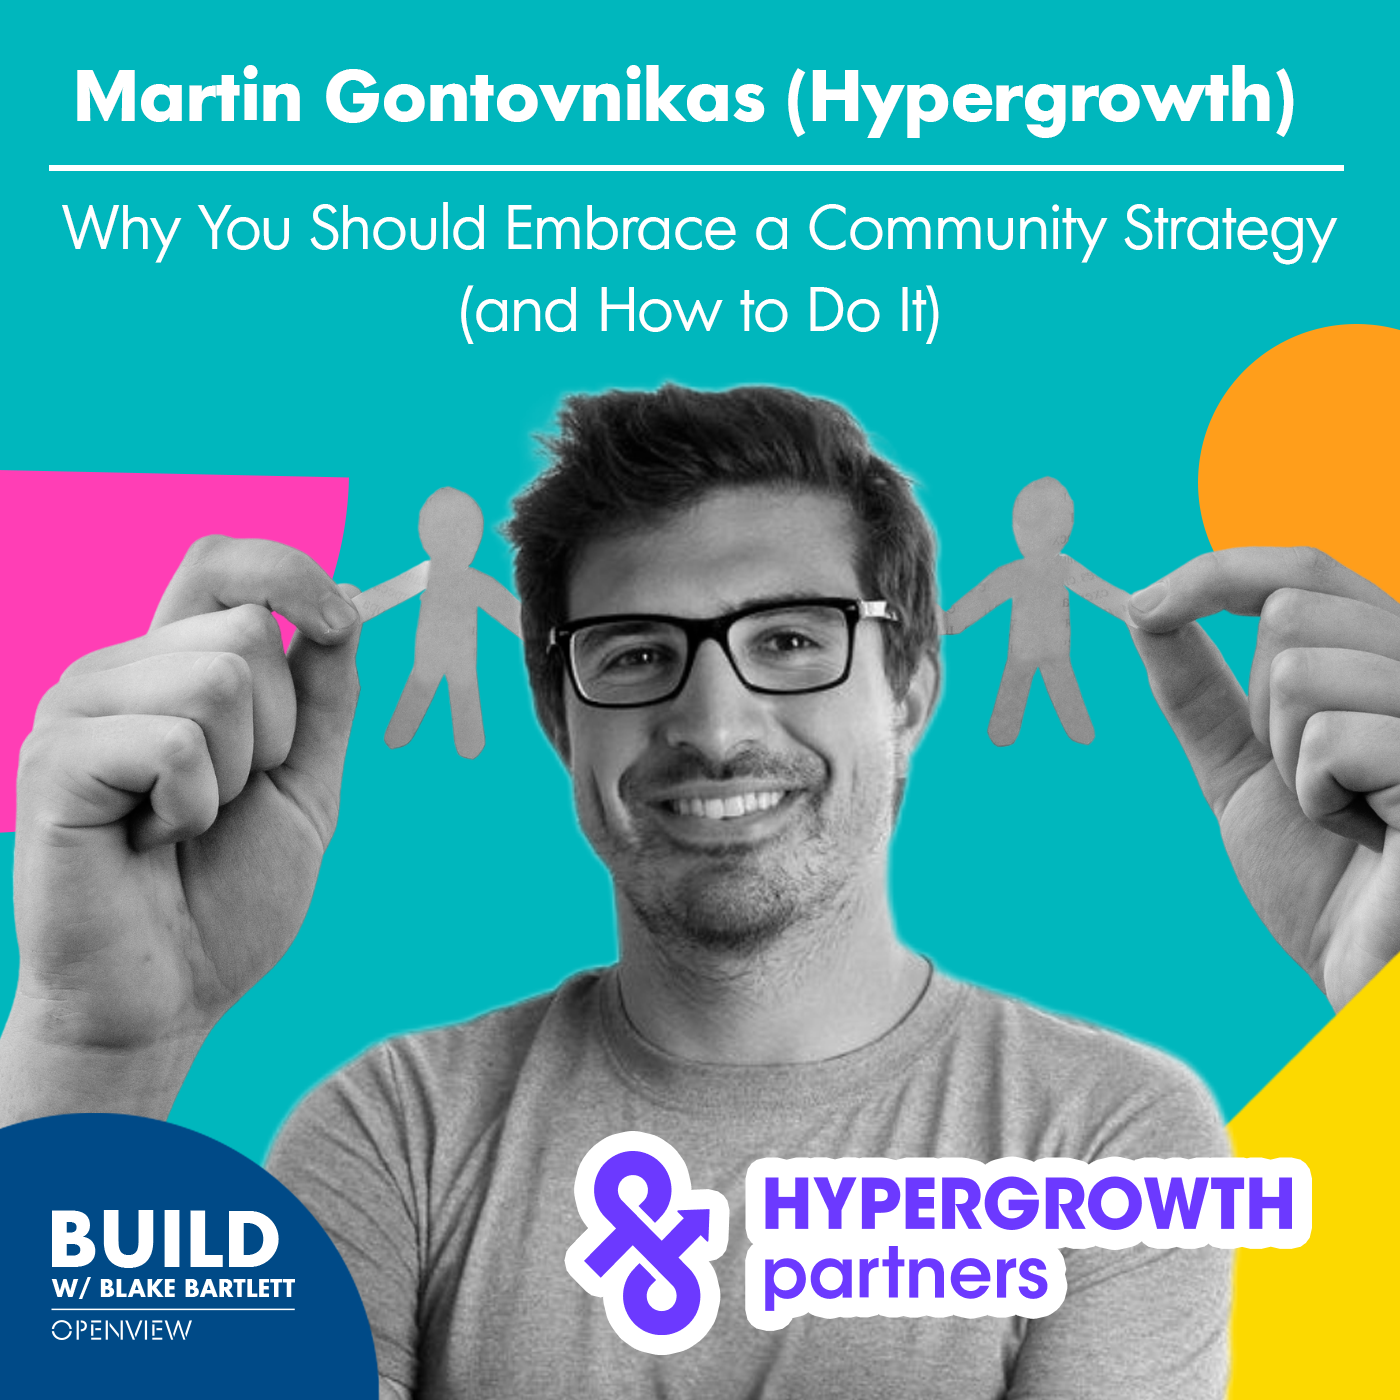 Martin Gontovnikas (HyperGrowth): Why You Should Embrace a Community Strategy (and How to Do It)